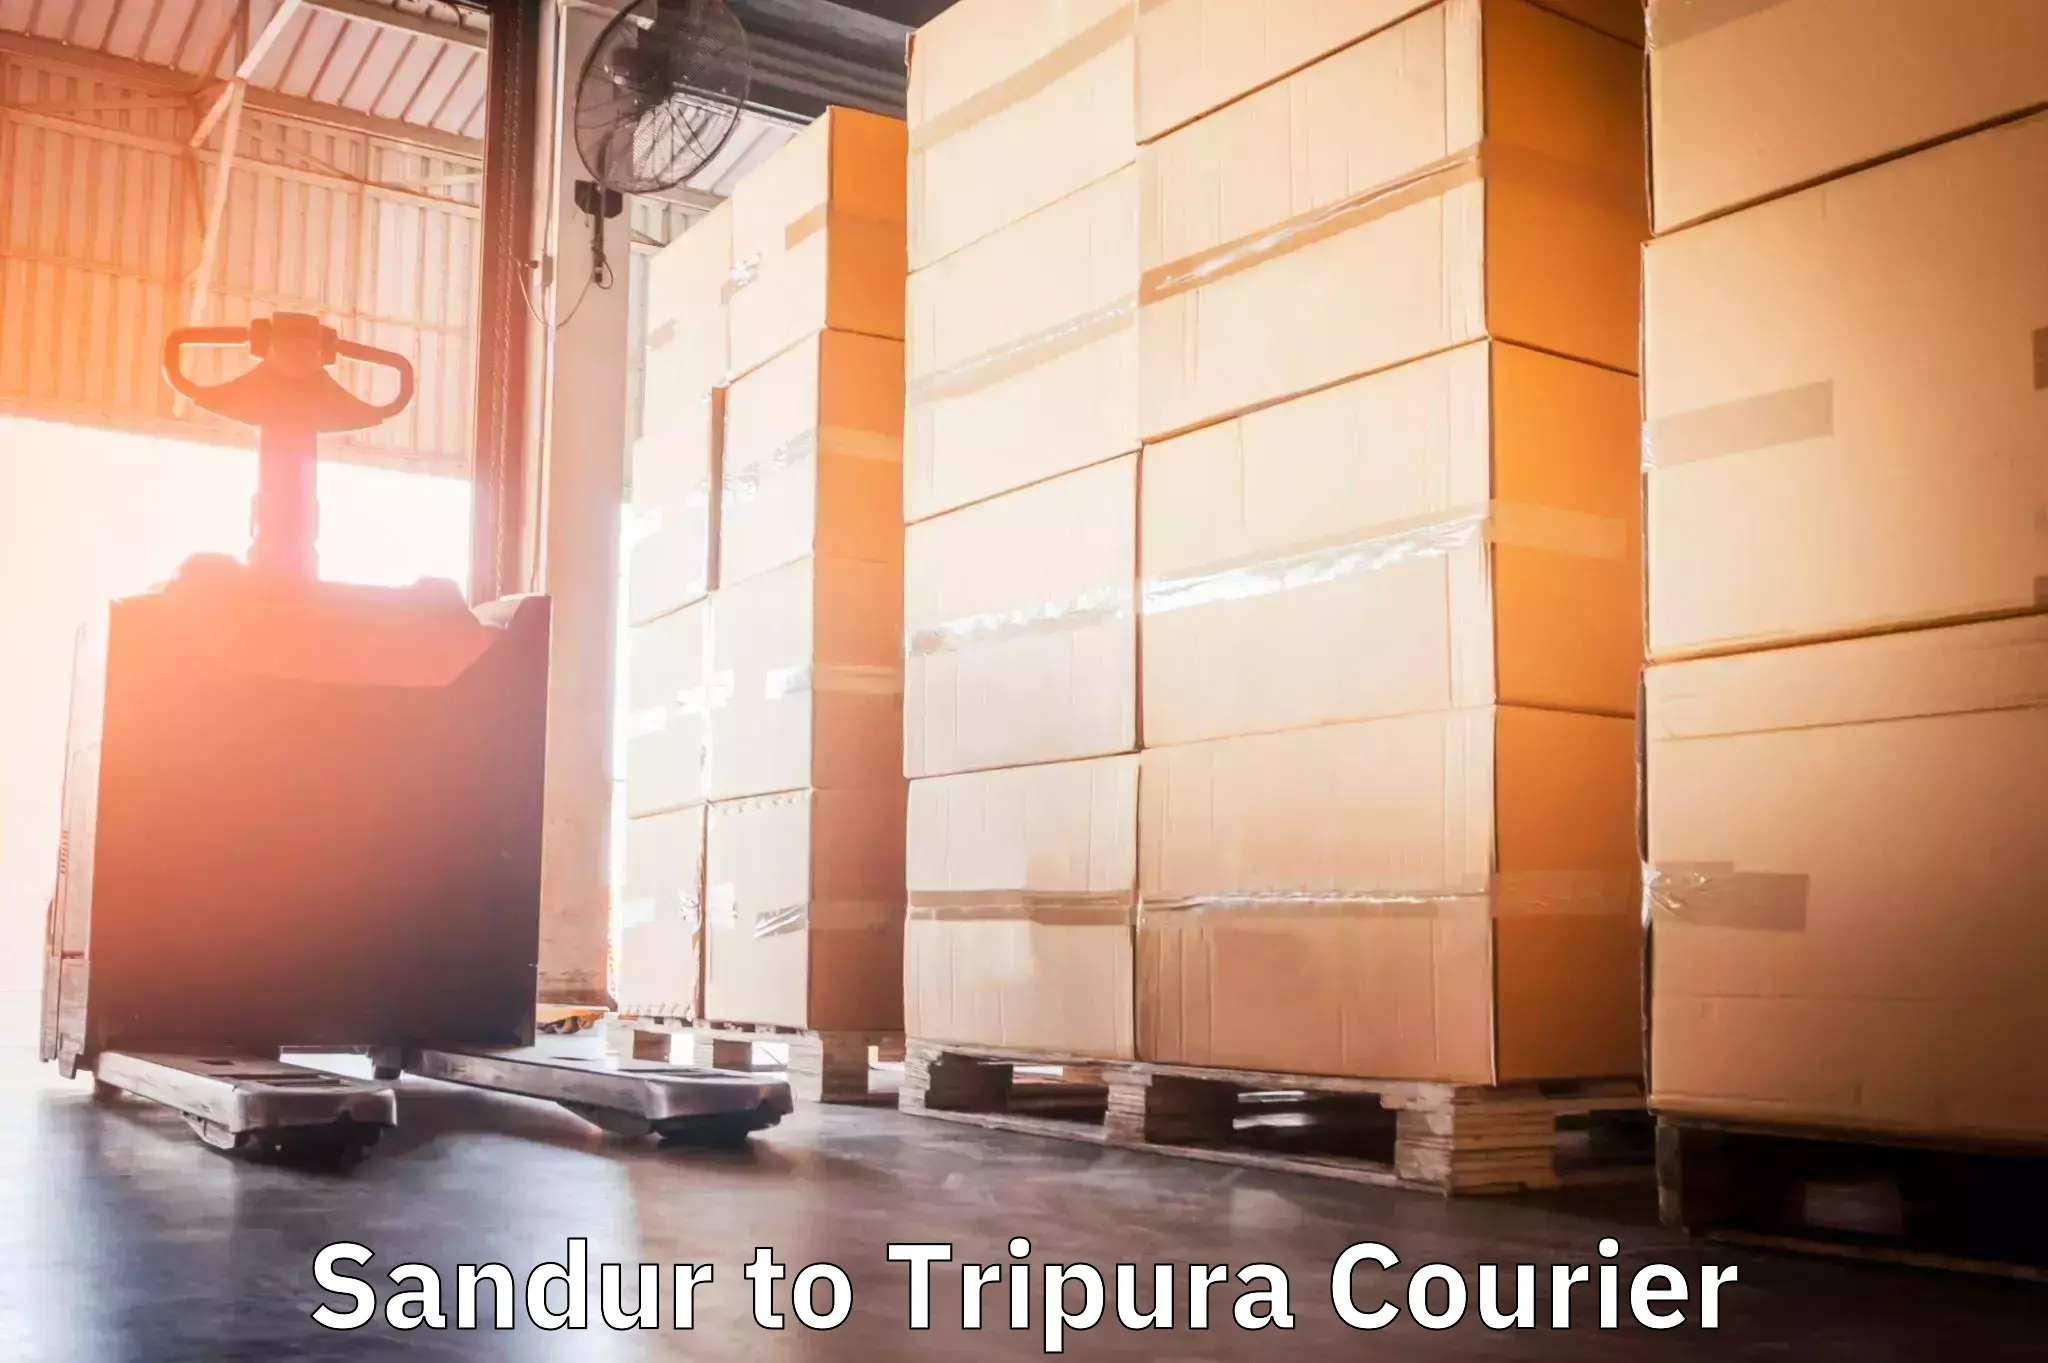 State-of-the-art courier technology Sandur to Tripura